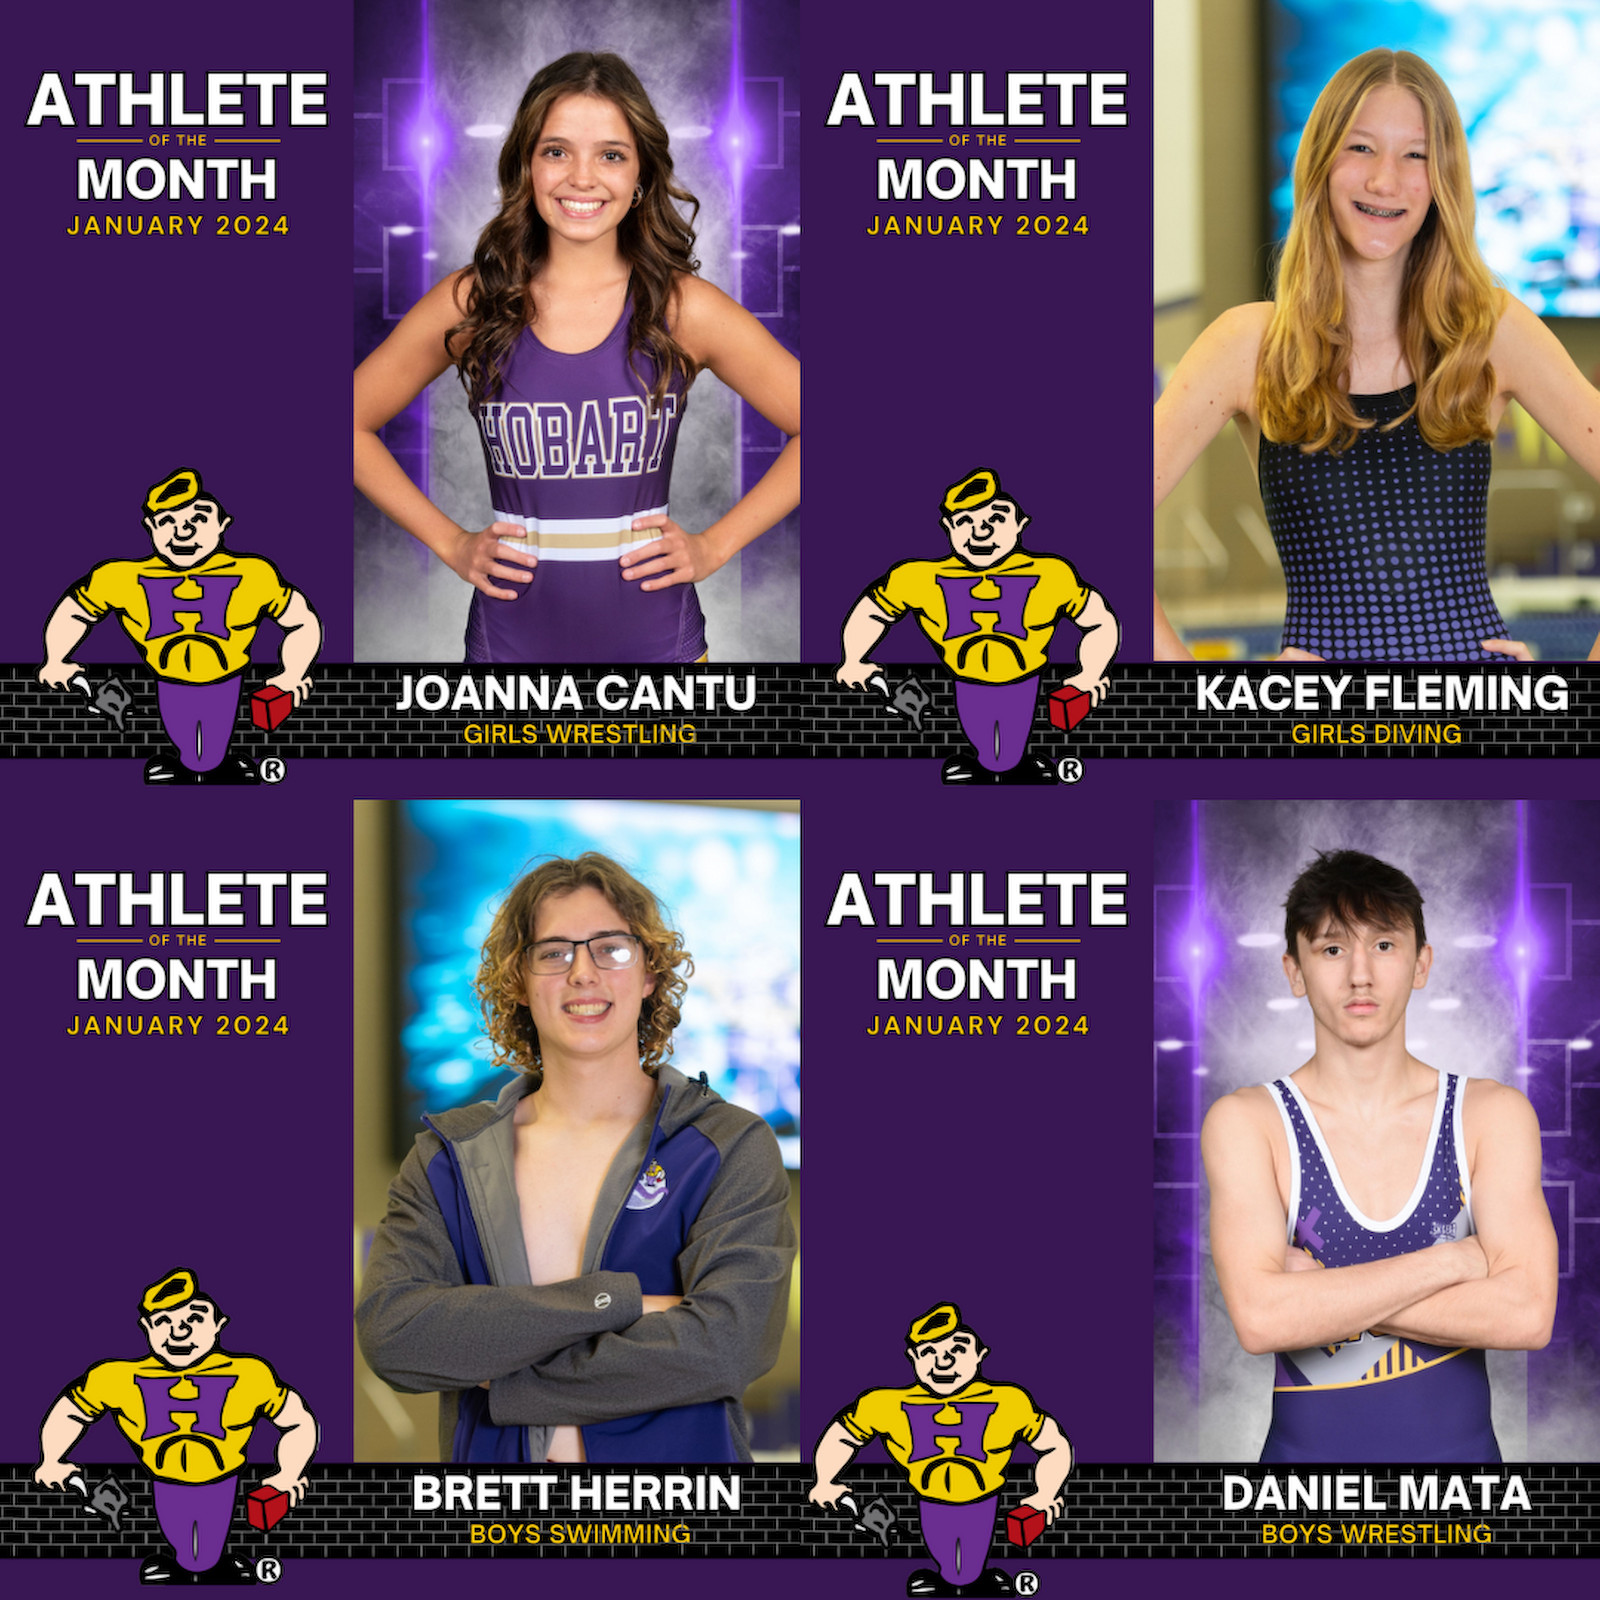 Congratulations to our January Athletes of the Month! gallery cover photo